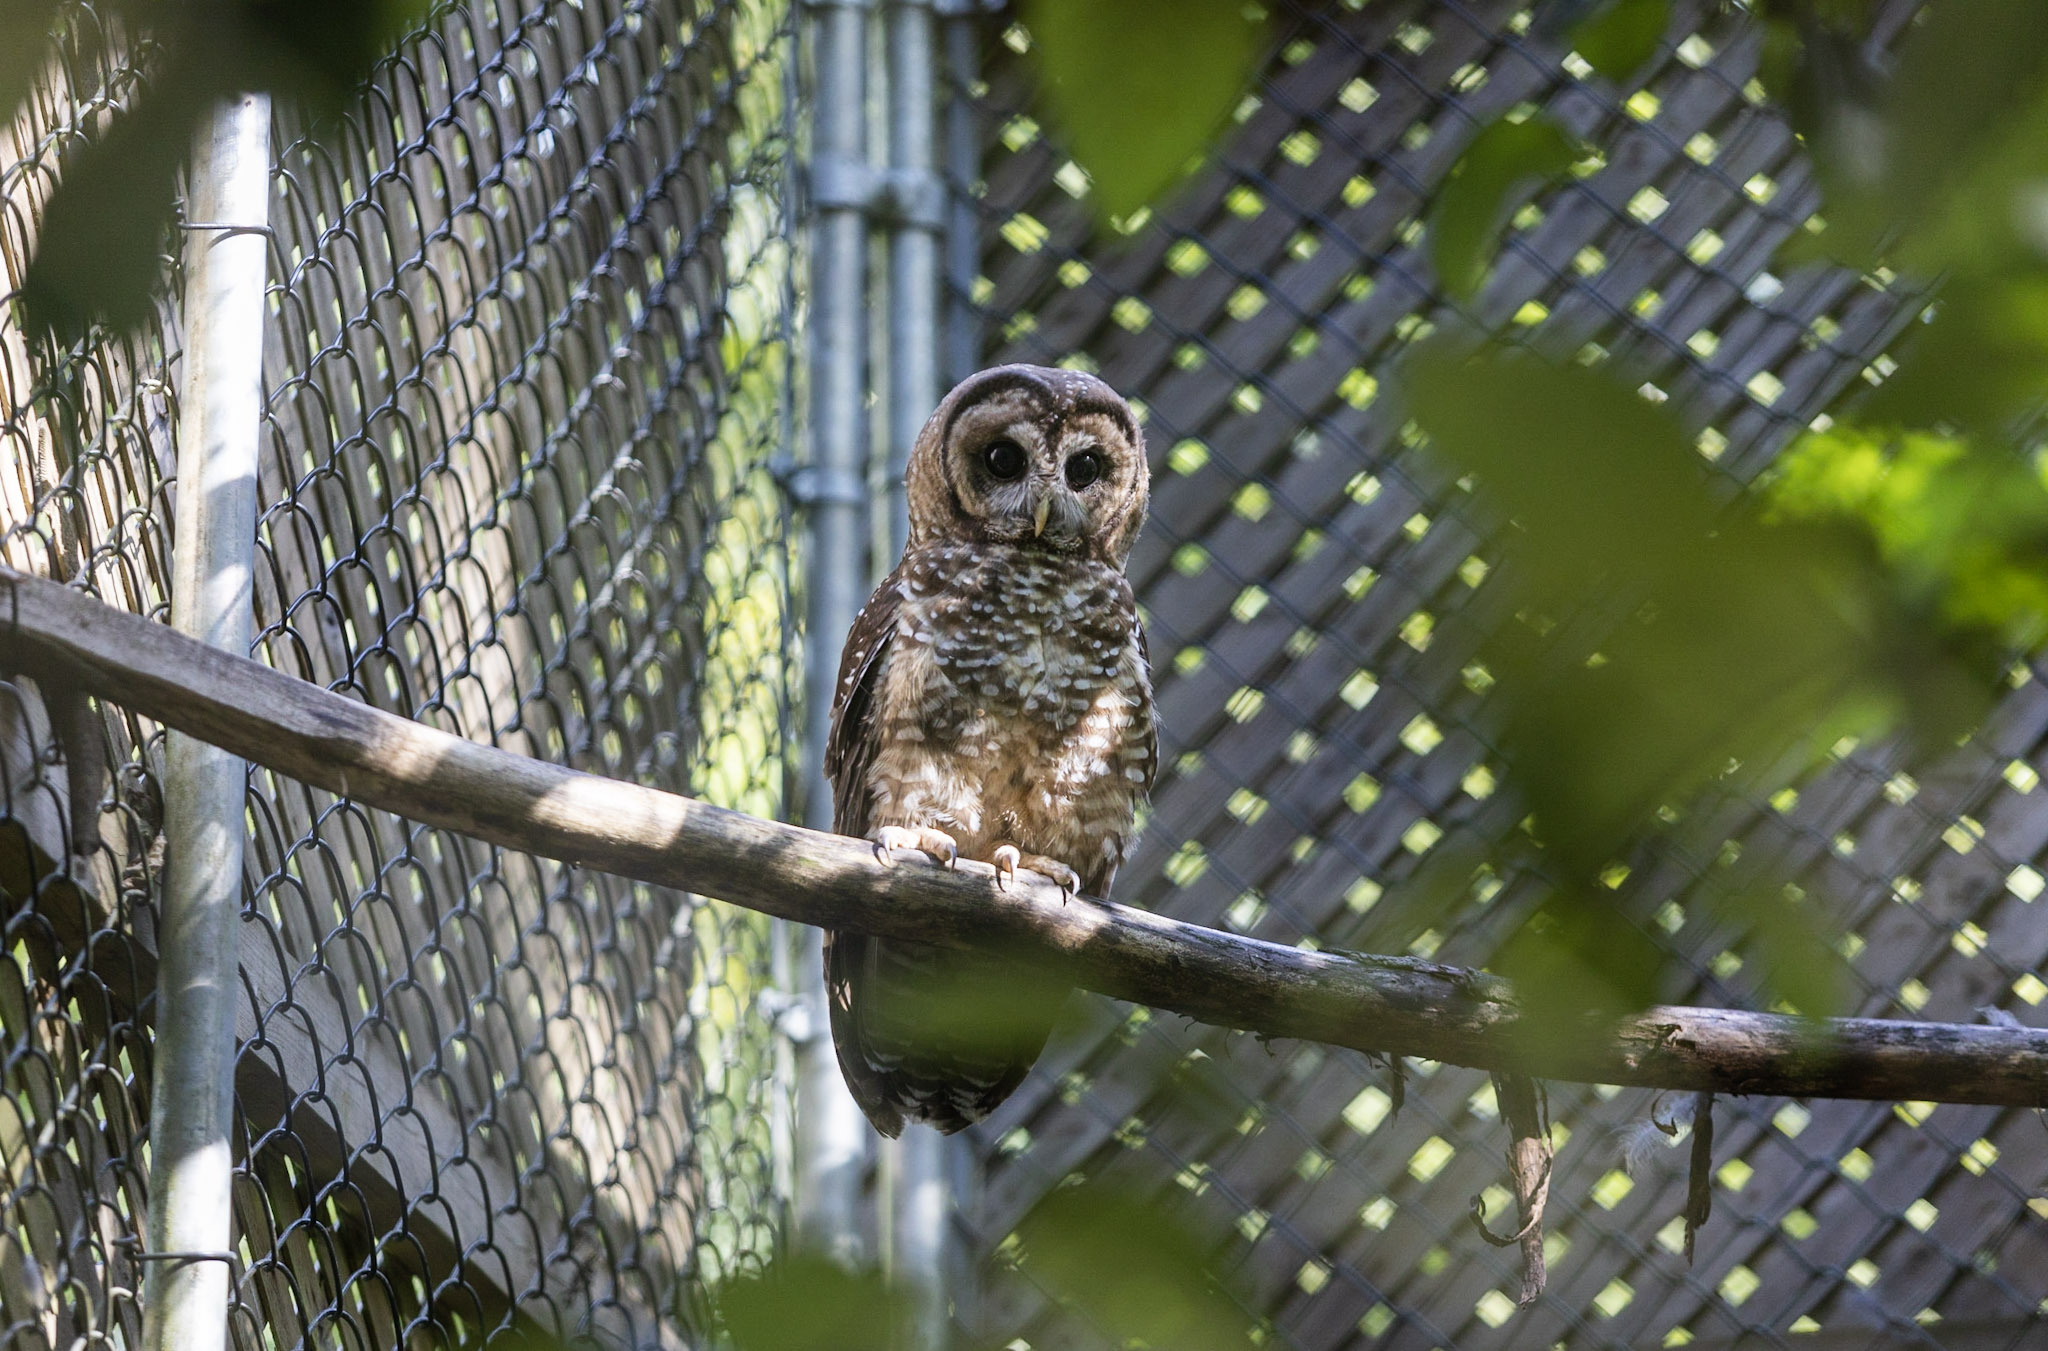 A bird from the Northern Spotted Owl Breeding Program (NSOBP) near Hope, B.C.